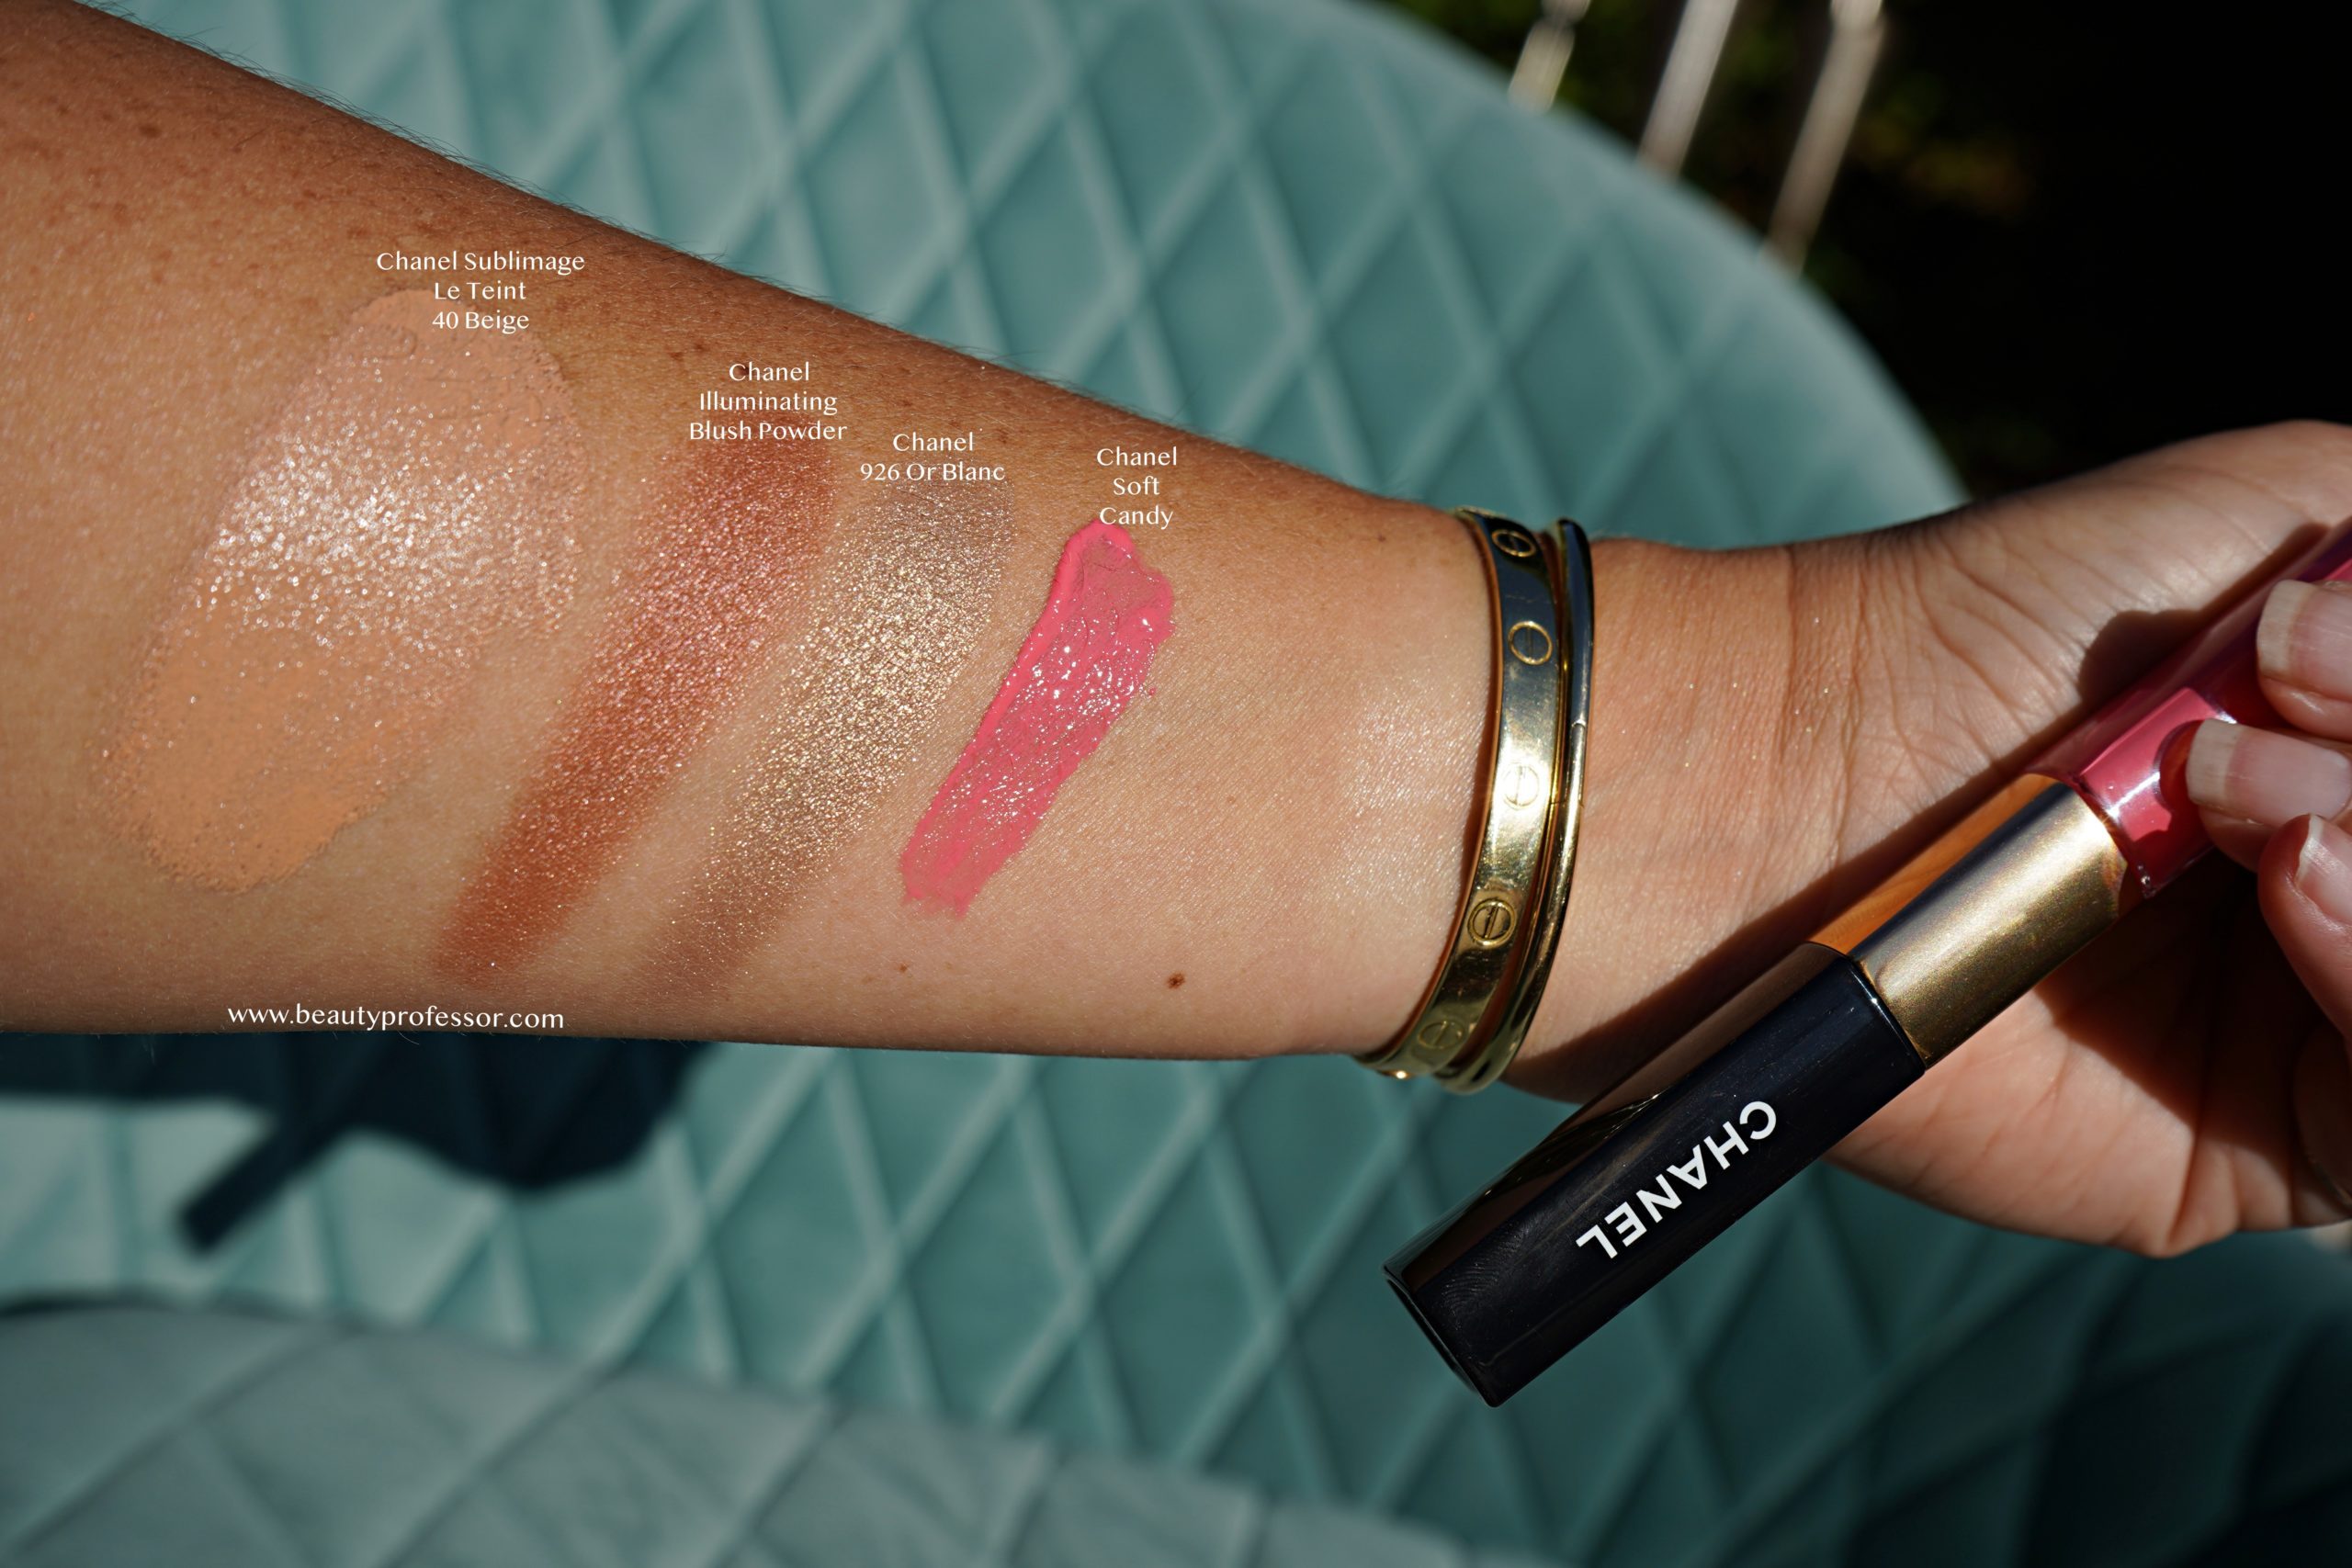 Swatches of my Chanel selections